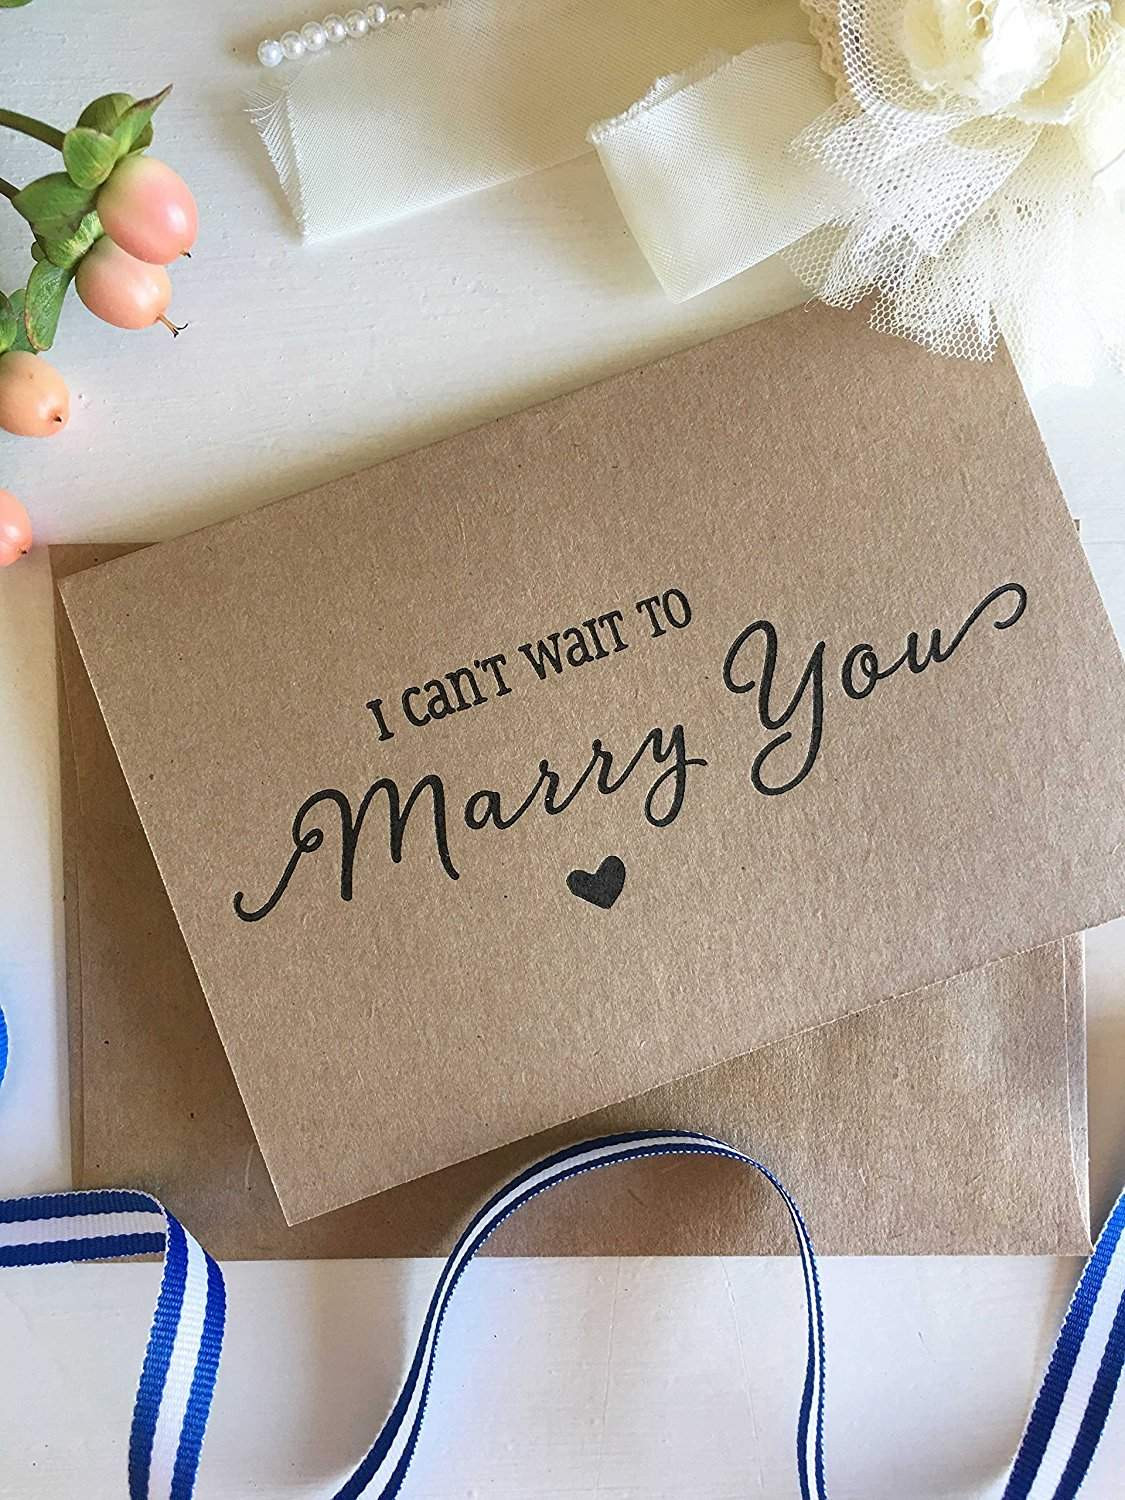 Wedding Gift From Bride To Groom
 Best Wedding Day Gift Ideas From the Bride to the Groom